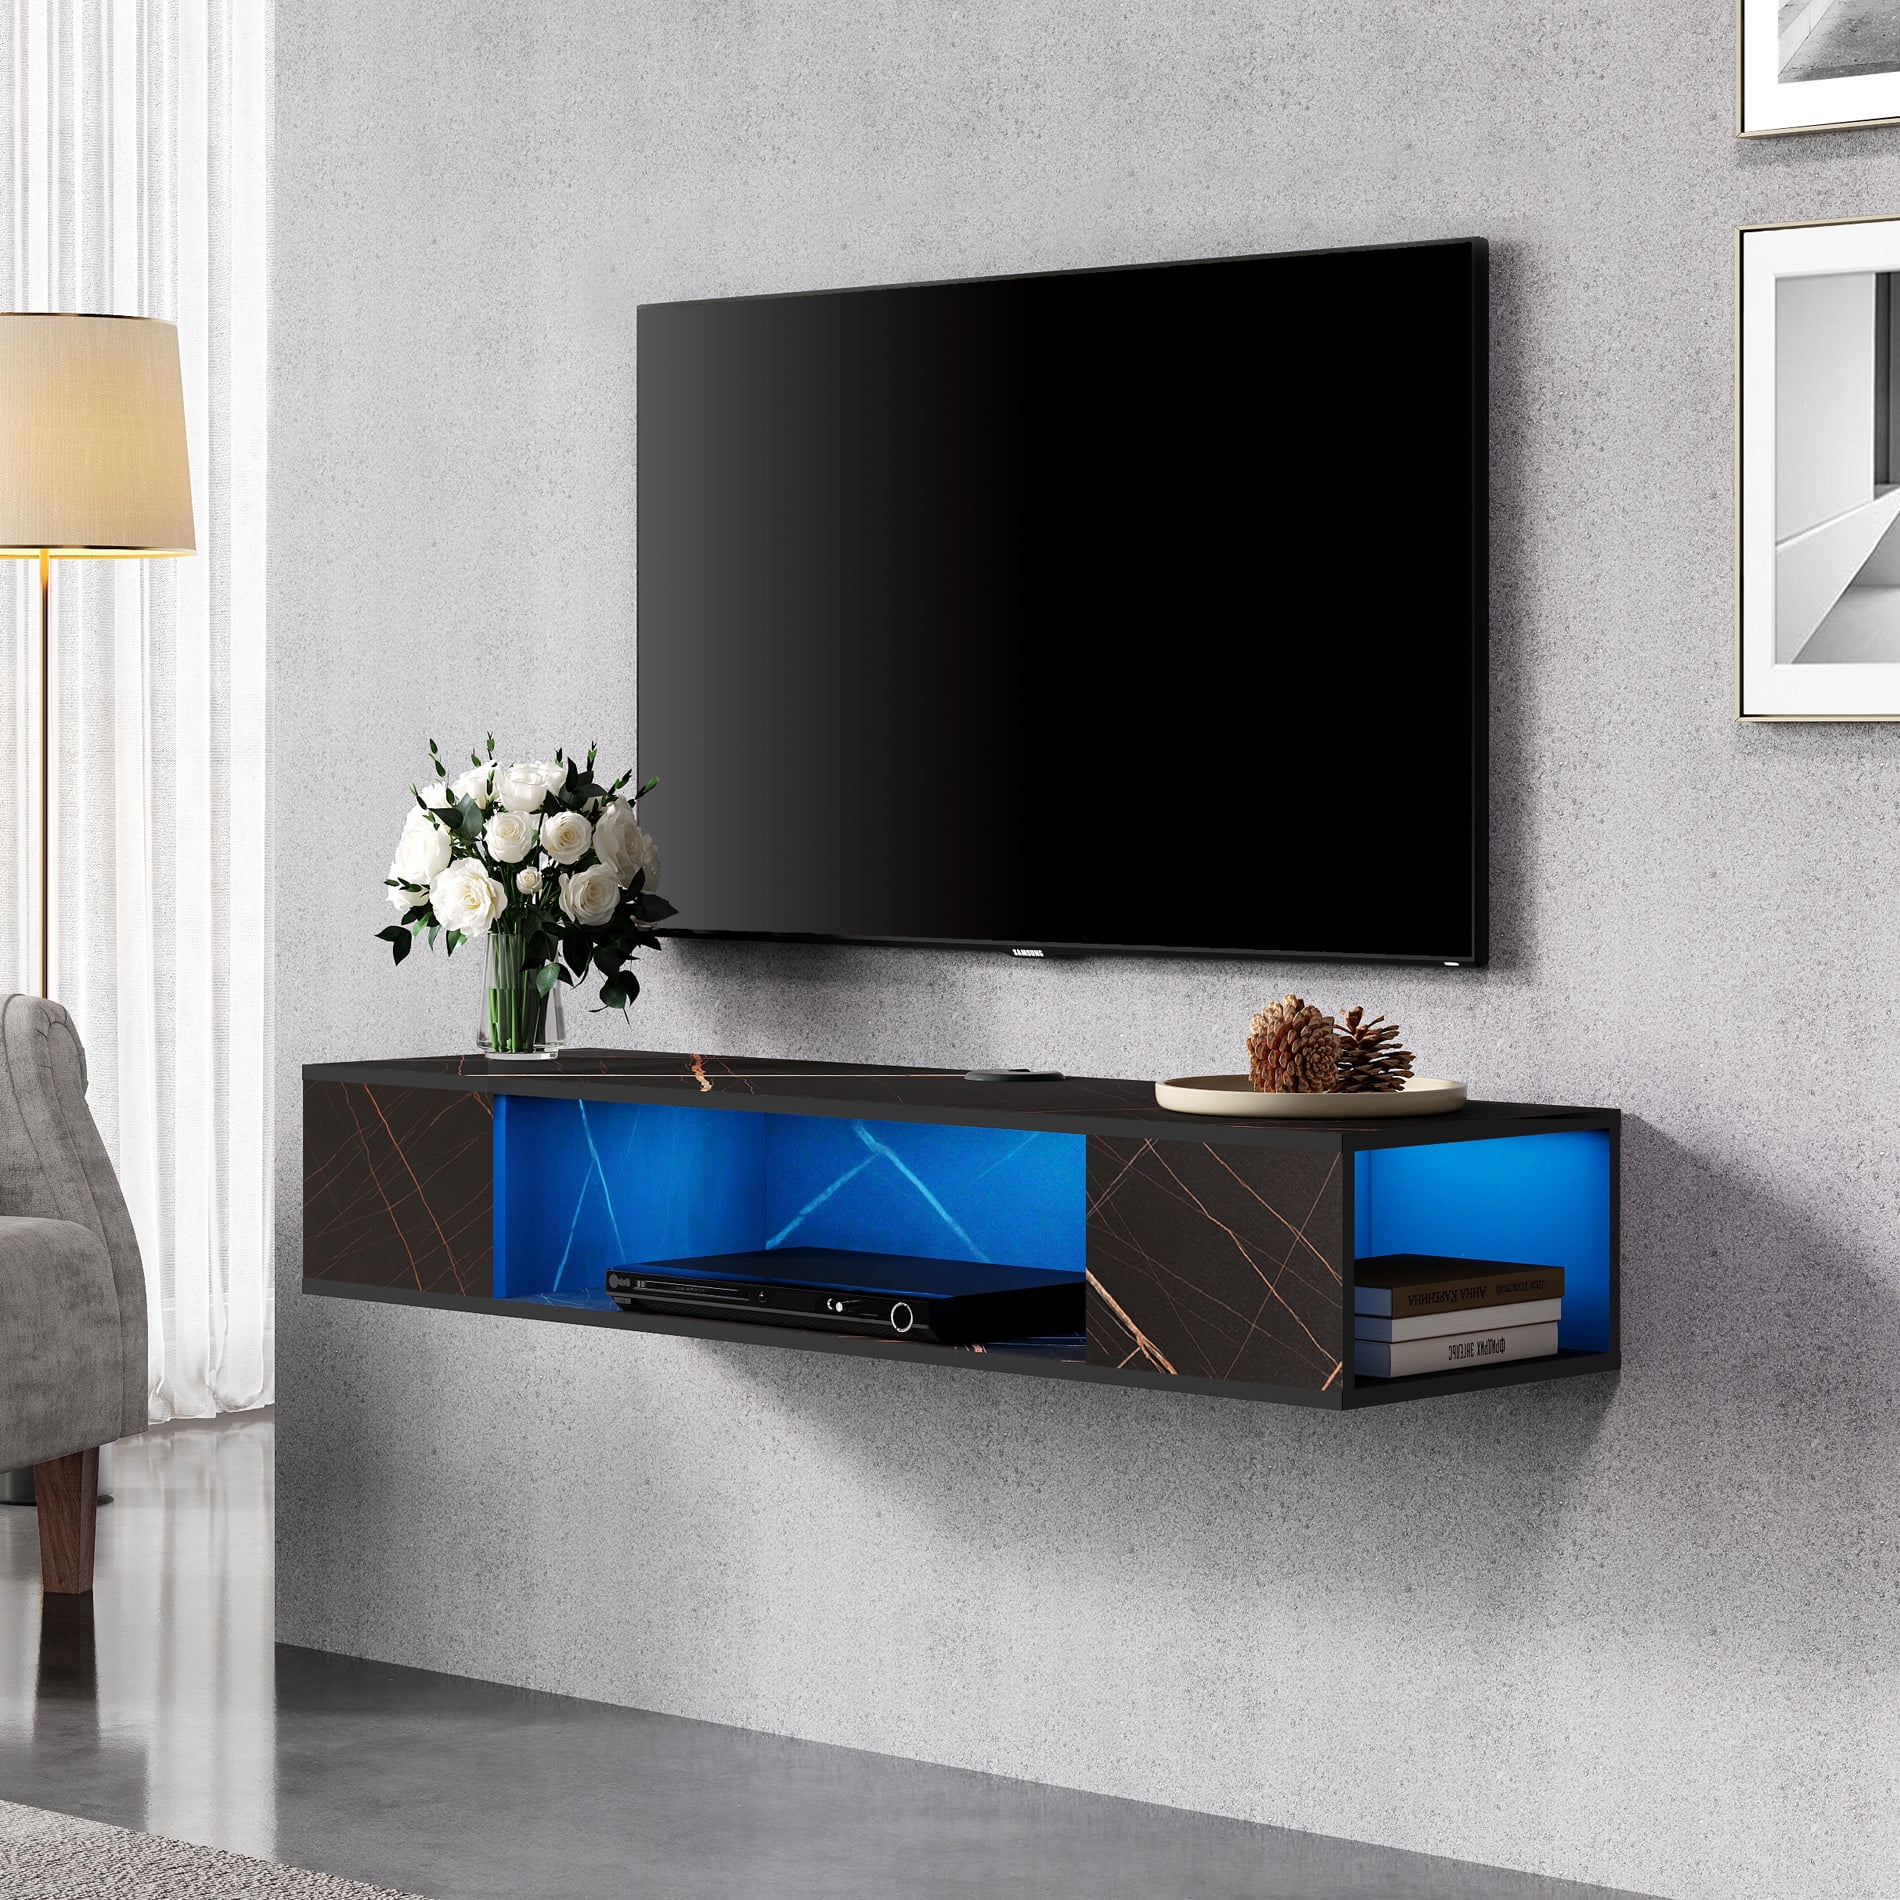 How To Center A Picture On A Wall Floating TV Stand Shelf with Blue LED Lights - Wall Mounted Entertainment  Center Media Console Component Under TV with 3 Storages, 39.4", Imitation  Marble - Walmart.com